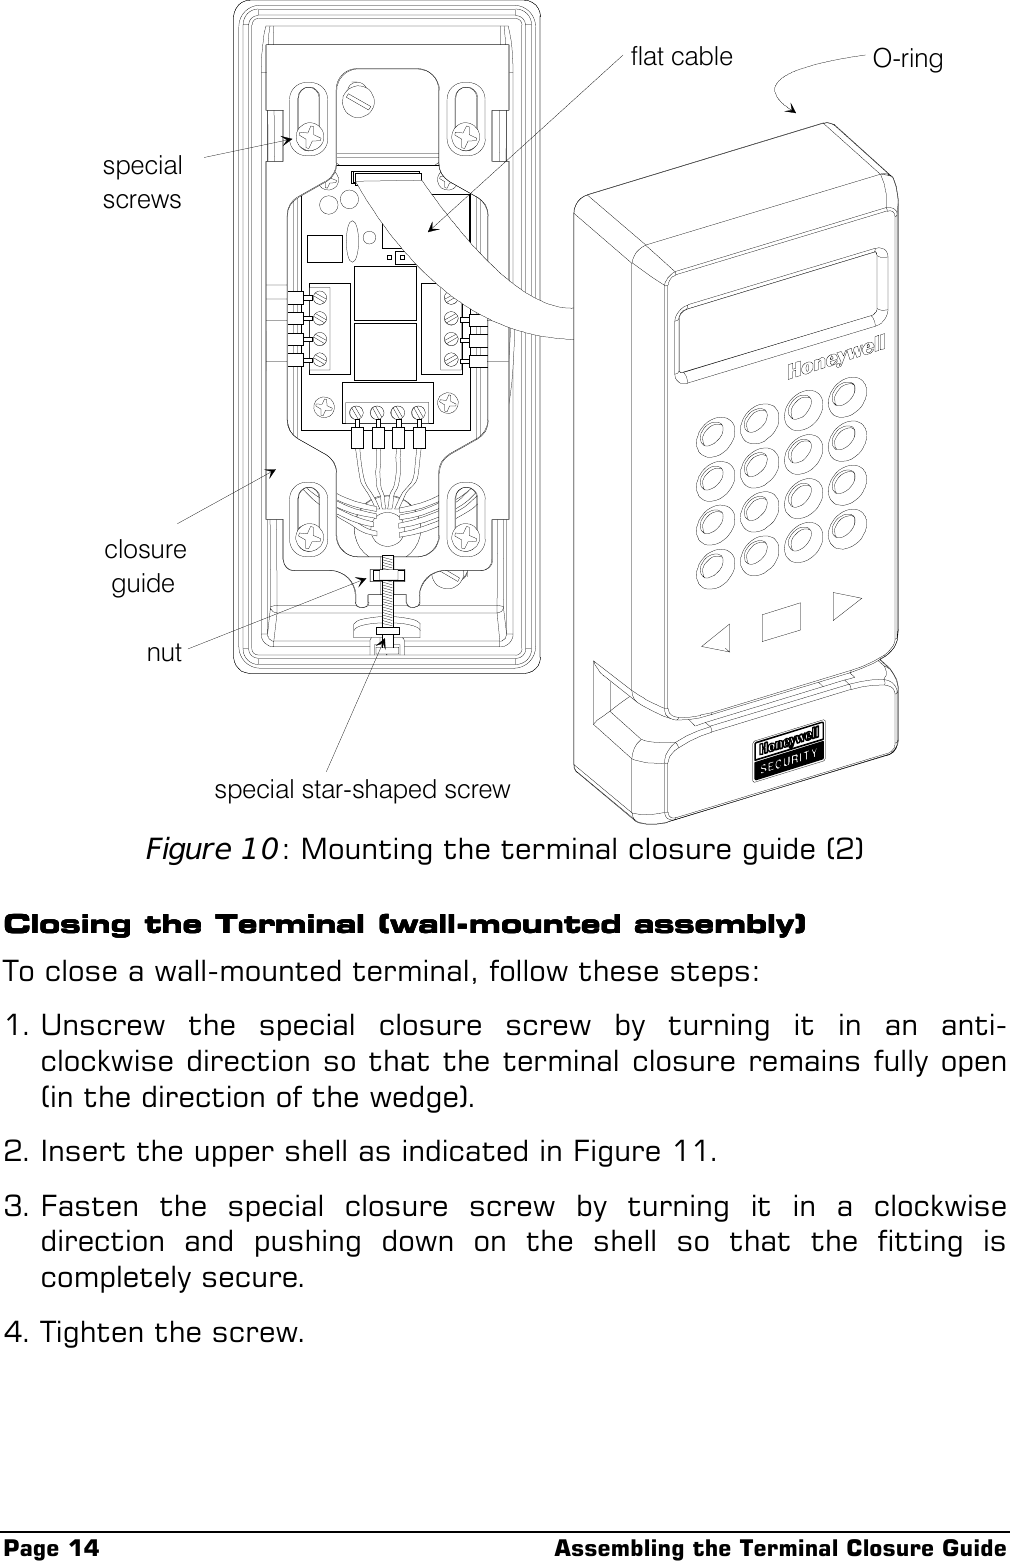 Page 14 Assembling the Terminal Closure Guideflat cablespecialscrewsclosure guidenutspecial star-shaped screwO-ringFigure 10: Mounting the terminal closure guide (2)Closing the Terminal (wall-mounted assembly)Closing the Terminal (wall-mounted assembly)Closing the Terminal (wall-mounted assembly)Closing the Terminal (wall-mounted assembly)To close a wall-mounted terminal, follow these steps:1. Unscrew the special closure screw by turning it in an anti-clockwise direction so that the terminal closure remains fully open(in the direction of the wedge).2. Insert the upper shell as indicated in Figure 11.3. Fasten the special closure screw by turning it in a clockwisedirection and pushing down on the shell so that the fitting iscompletely secure.4. Tighten the screw.